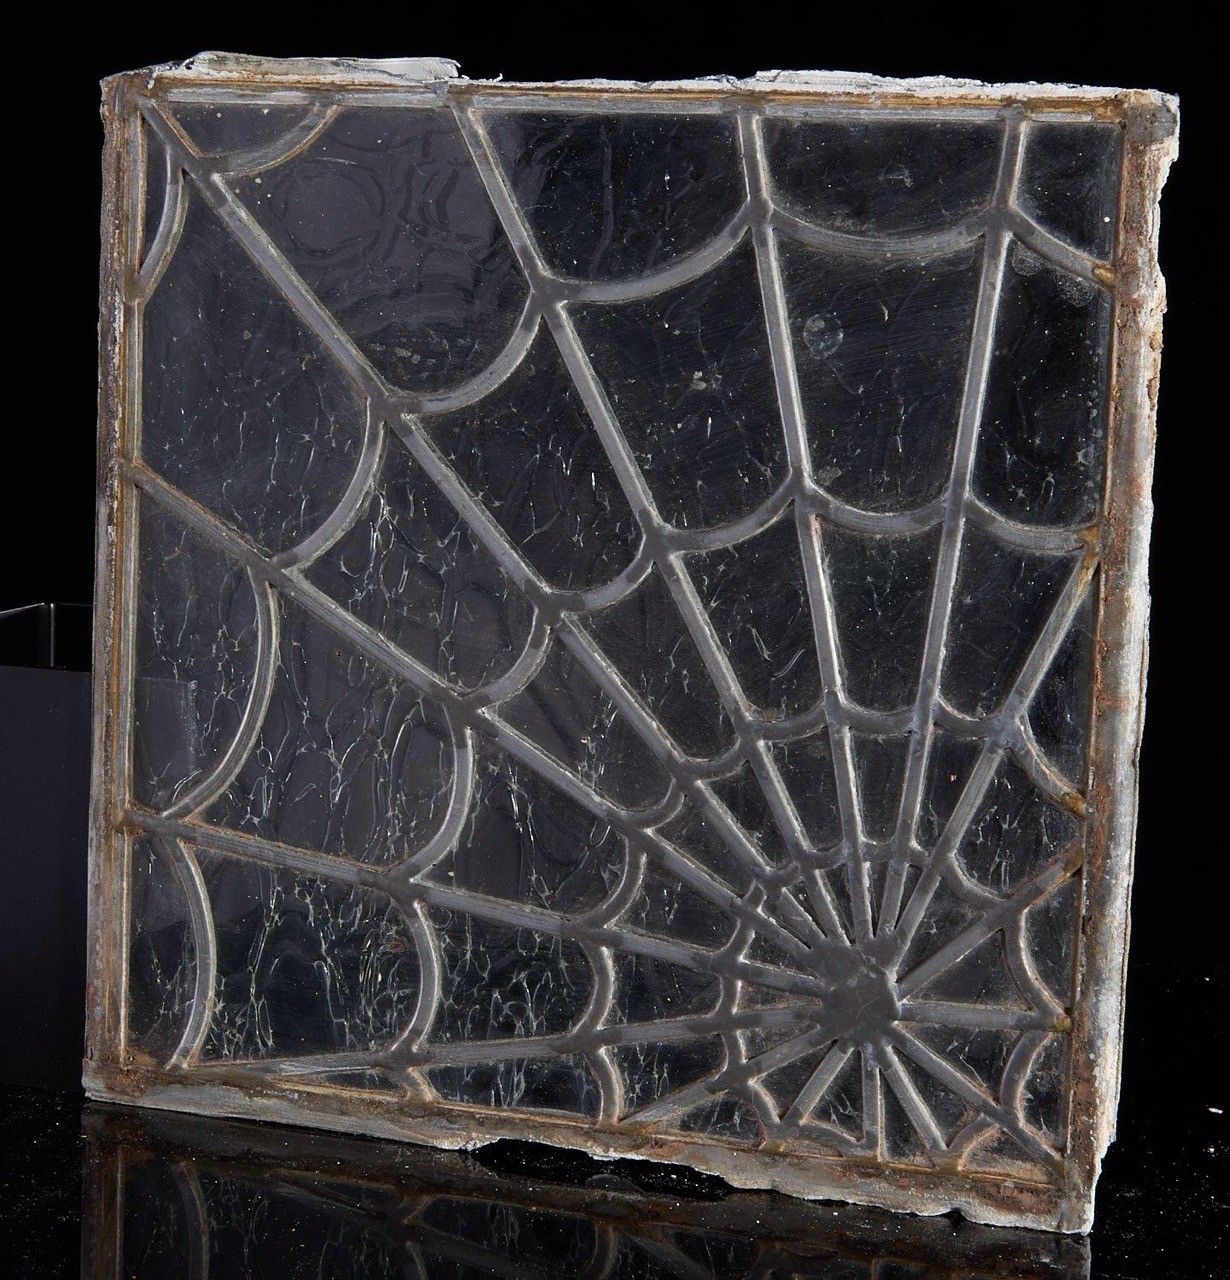 Antique leaded glass Spider Web window